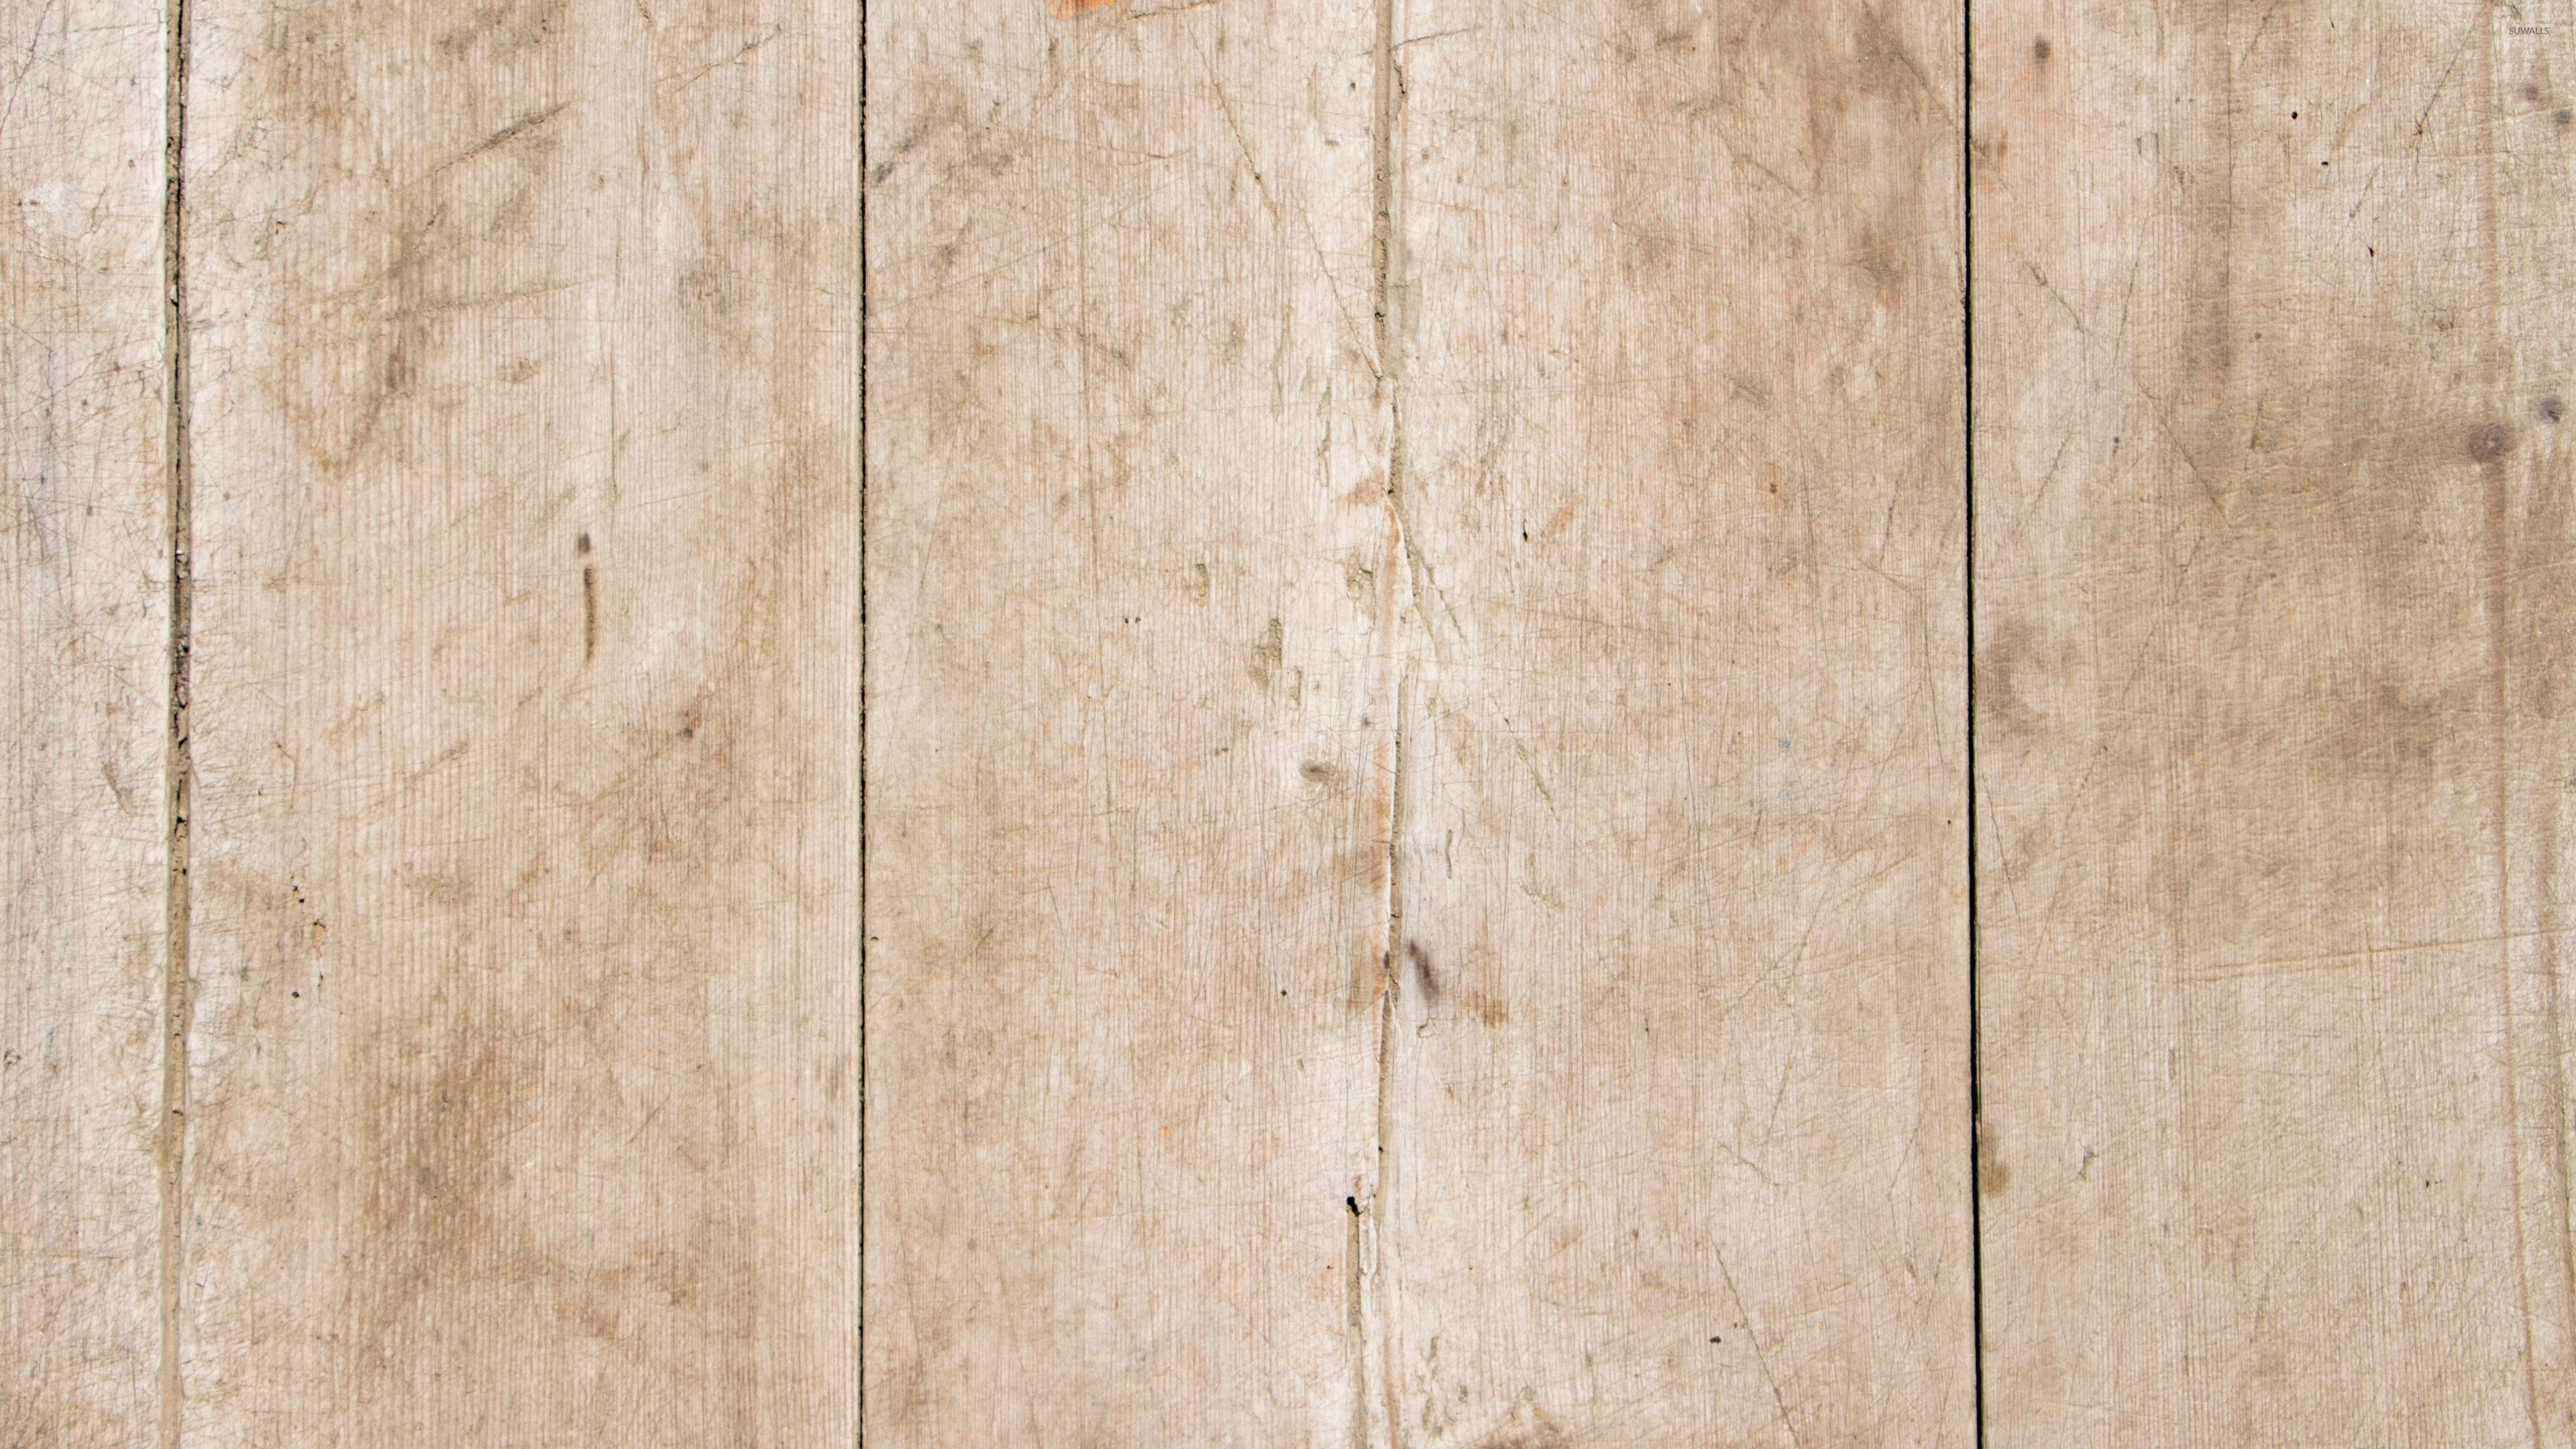 3840x2160 Old scratched wood wallpaper